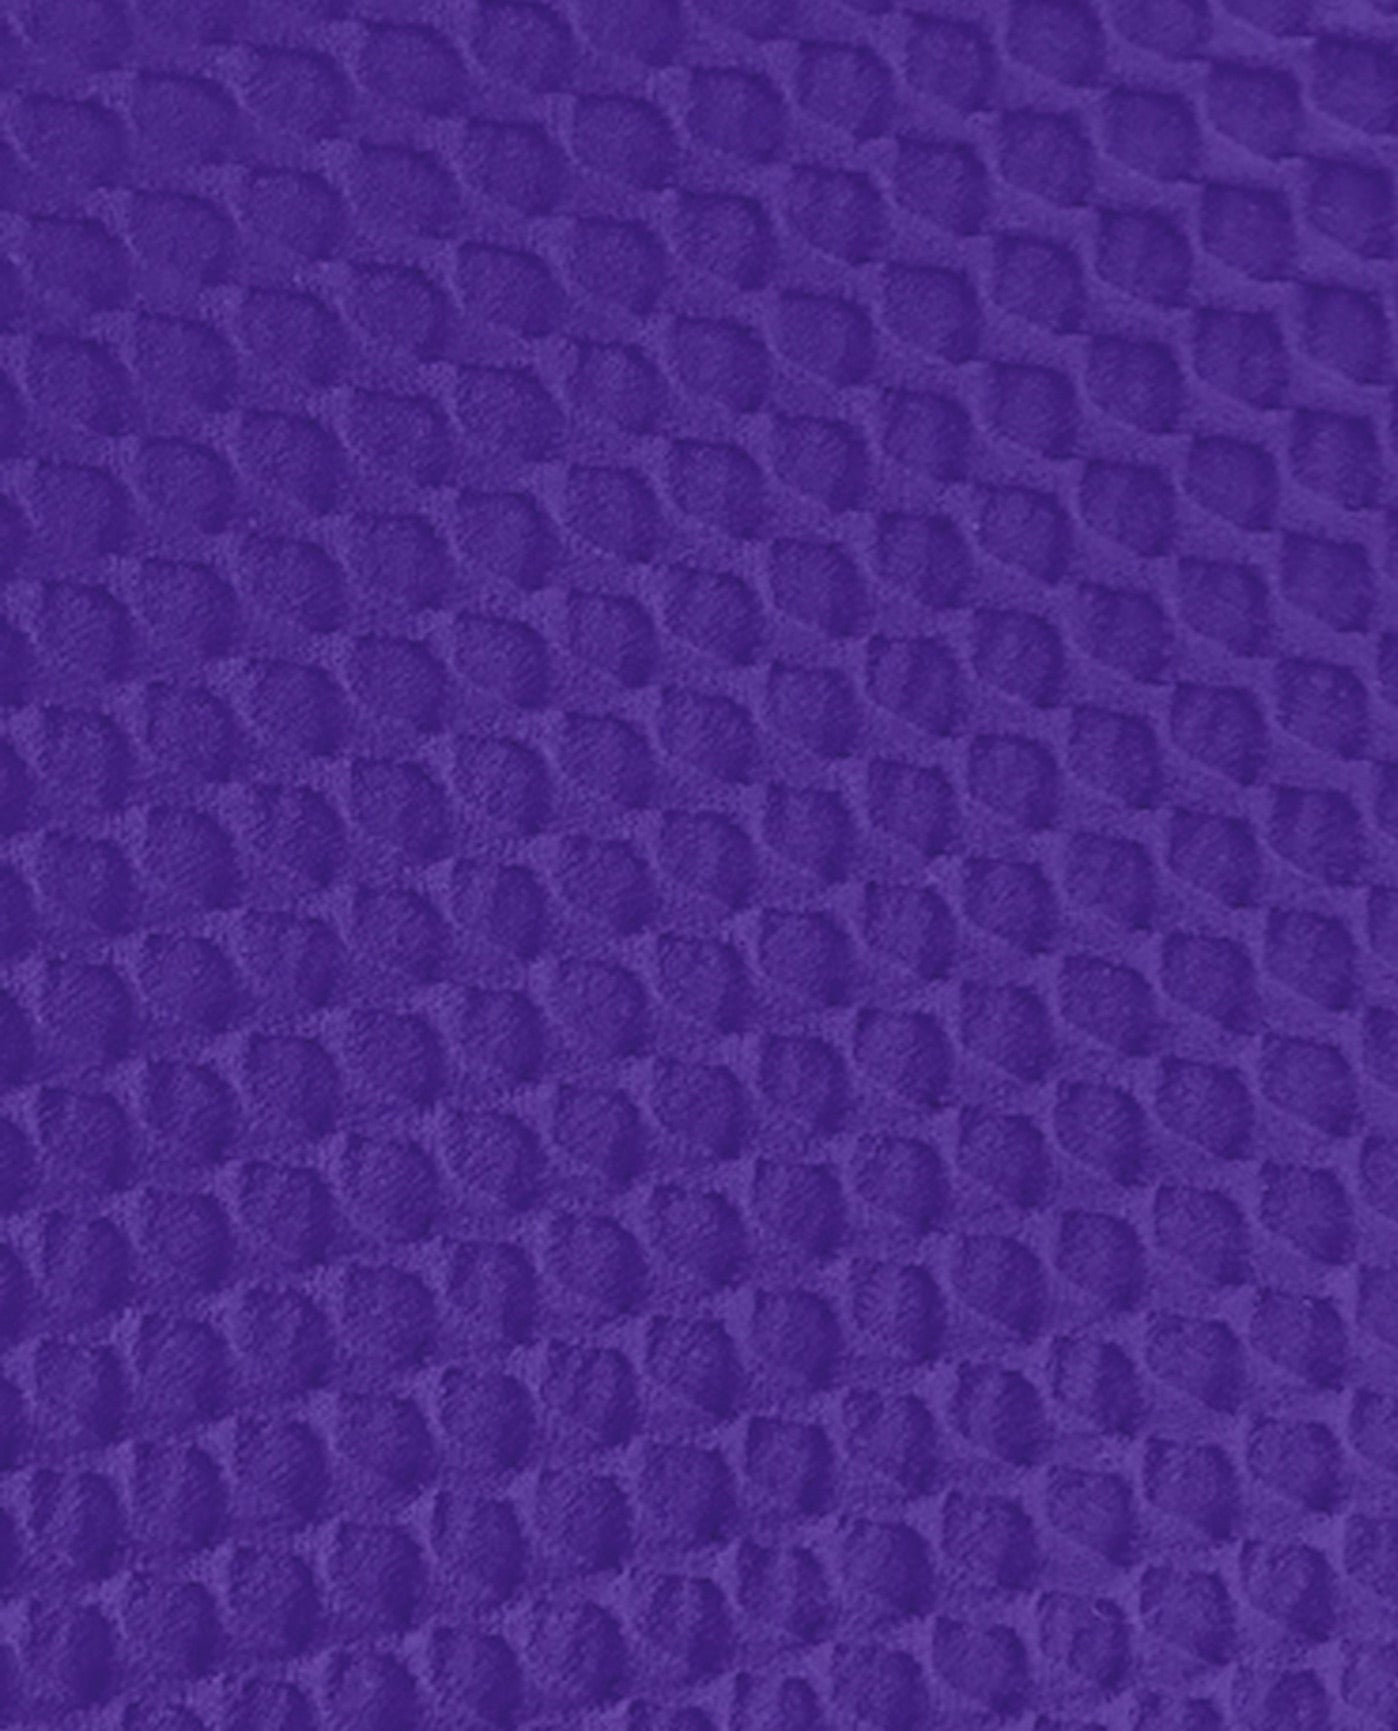 FABRIC SWATCH VIEW OF CHLORINE RESISTANT AQUAMORE COLOR BLOCK TEXTURED MOCK SURPLICE ONE PIECE SWIMSUIT | 618 AQT TEXTURED PURPLE